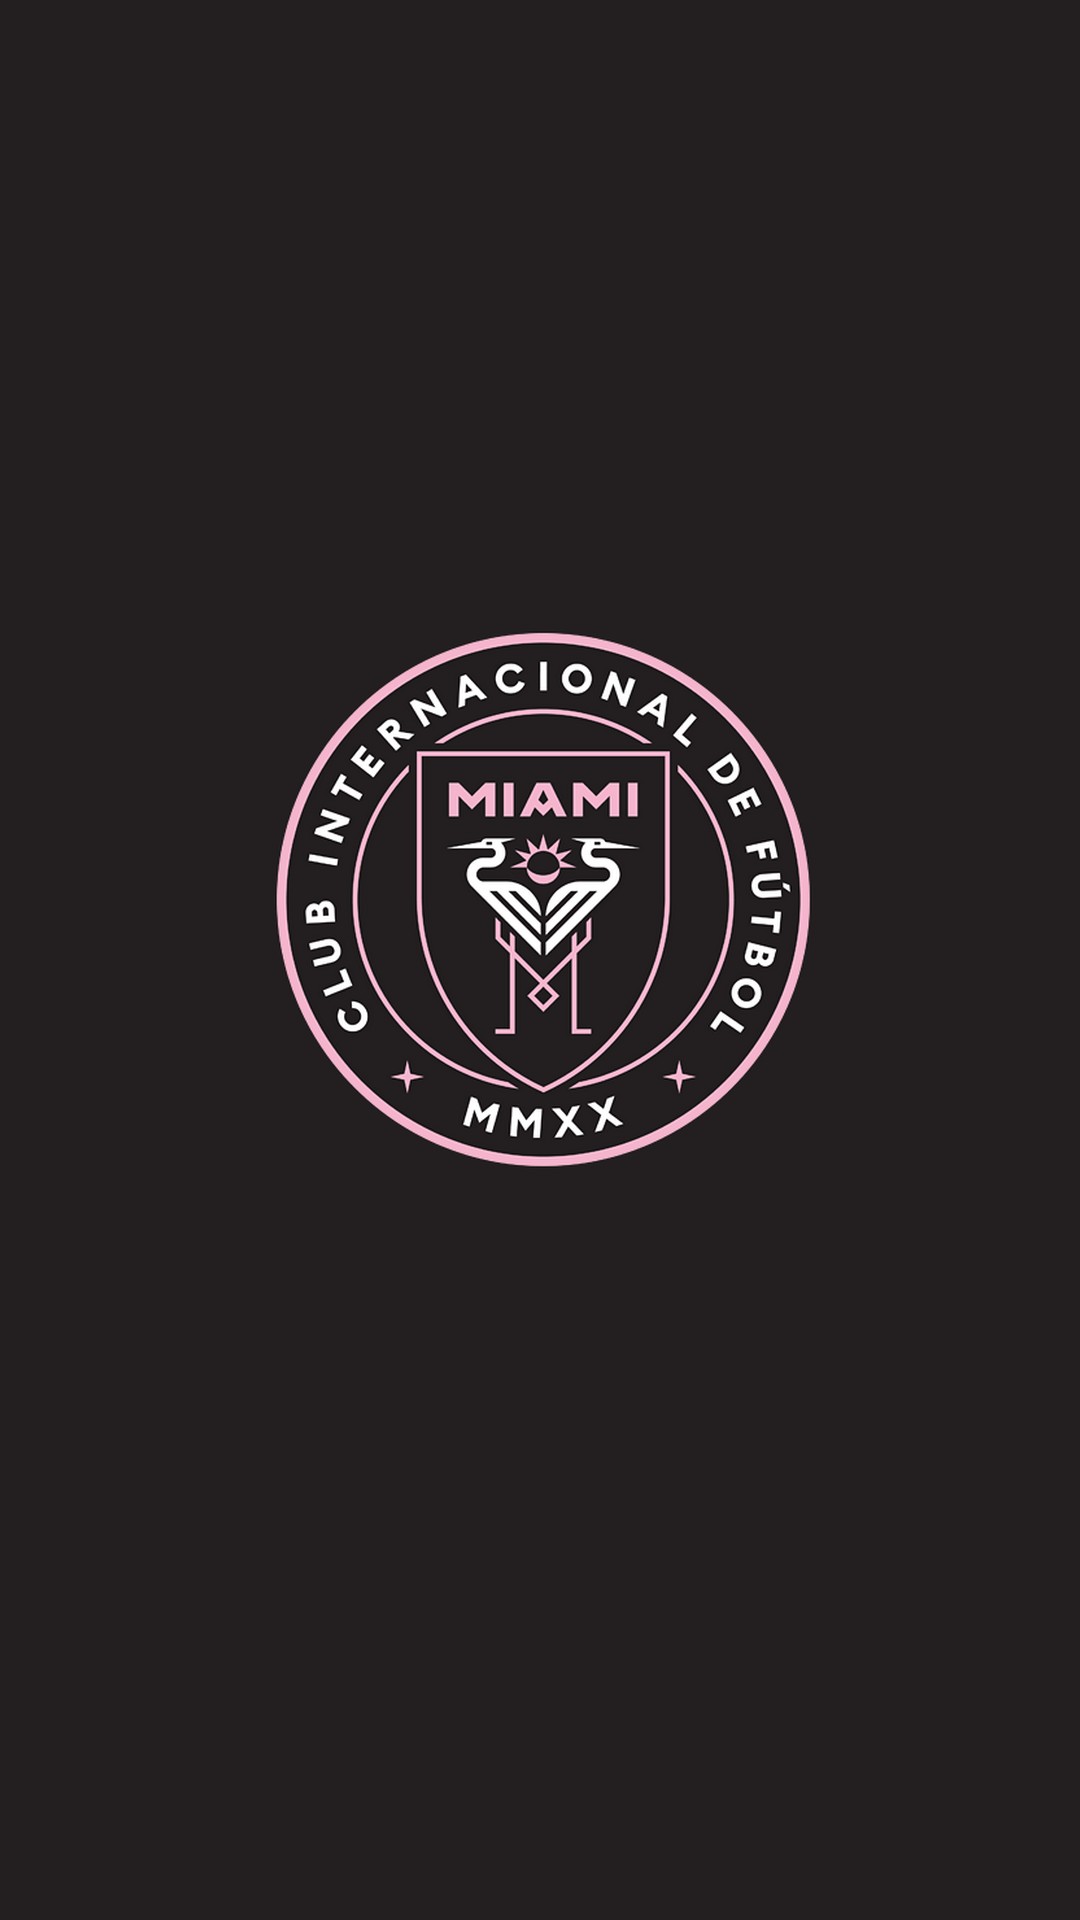 Inter Miami CF HD Wallpaper For iPhone With high-resolution 1080X1920 pixel. You can use this wallpaper for your Desktop Computers, Mac Screensavers, Windows Backgrounds, iPhone Wallpapers, Tablet or Android Lock screen and another Mobile device